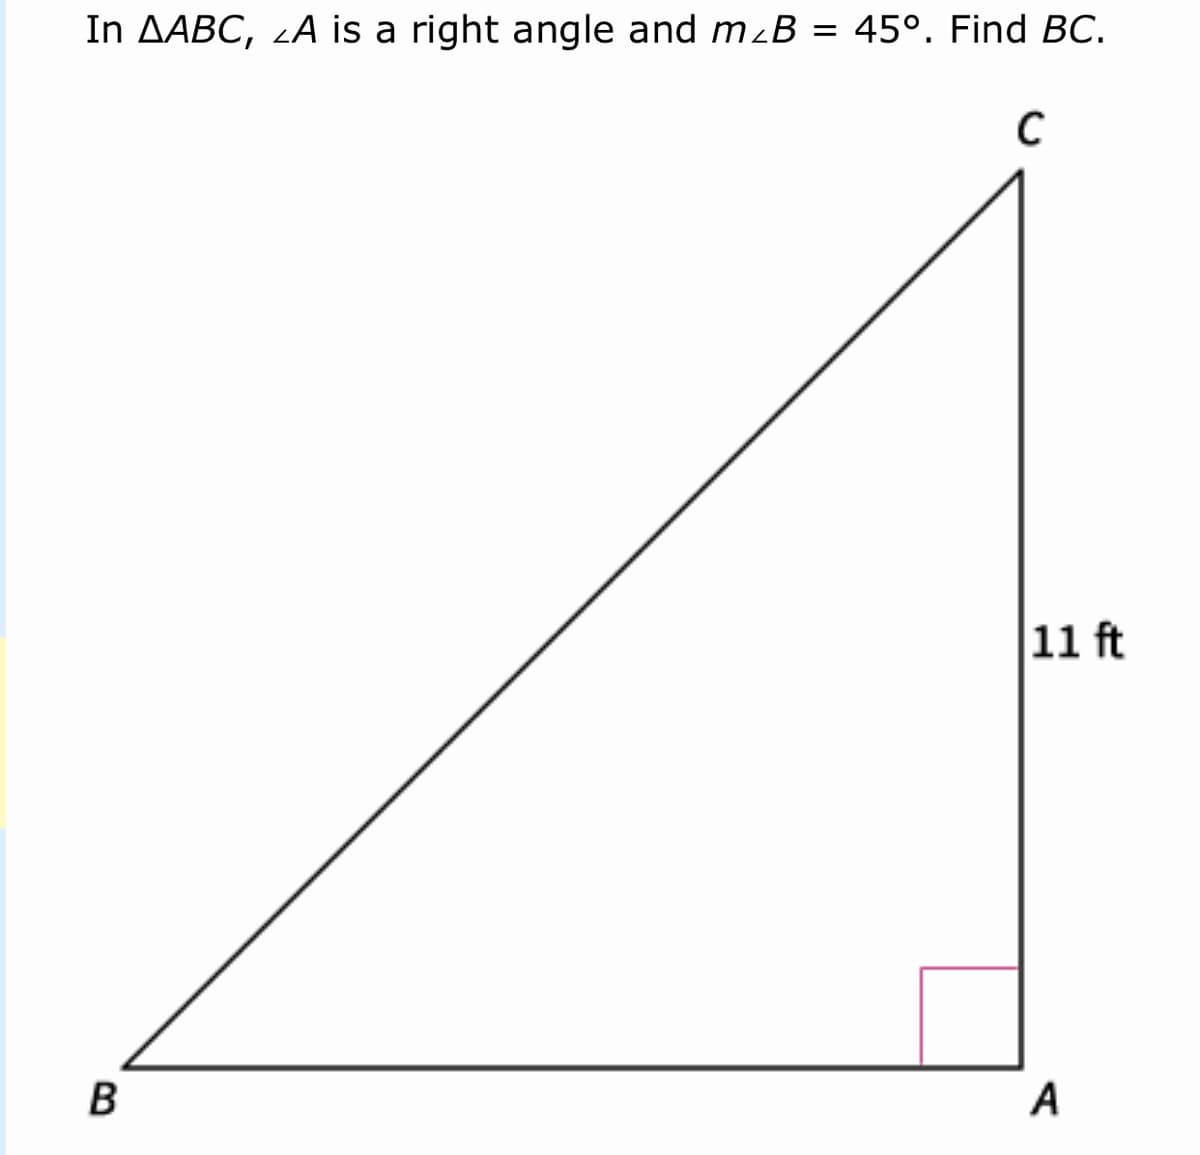 In AABC, zA is a right angle and mzB = 45°. Find BC.
C
11 ft
В
A
